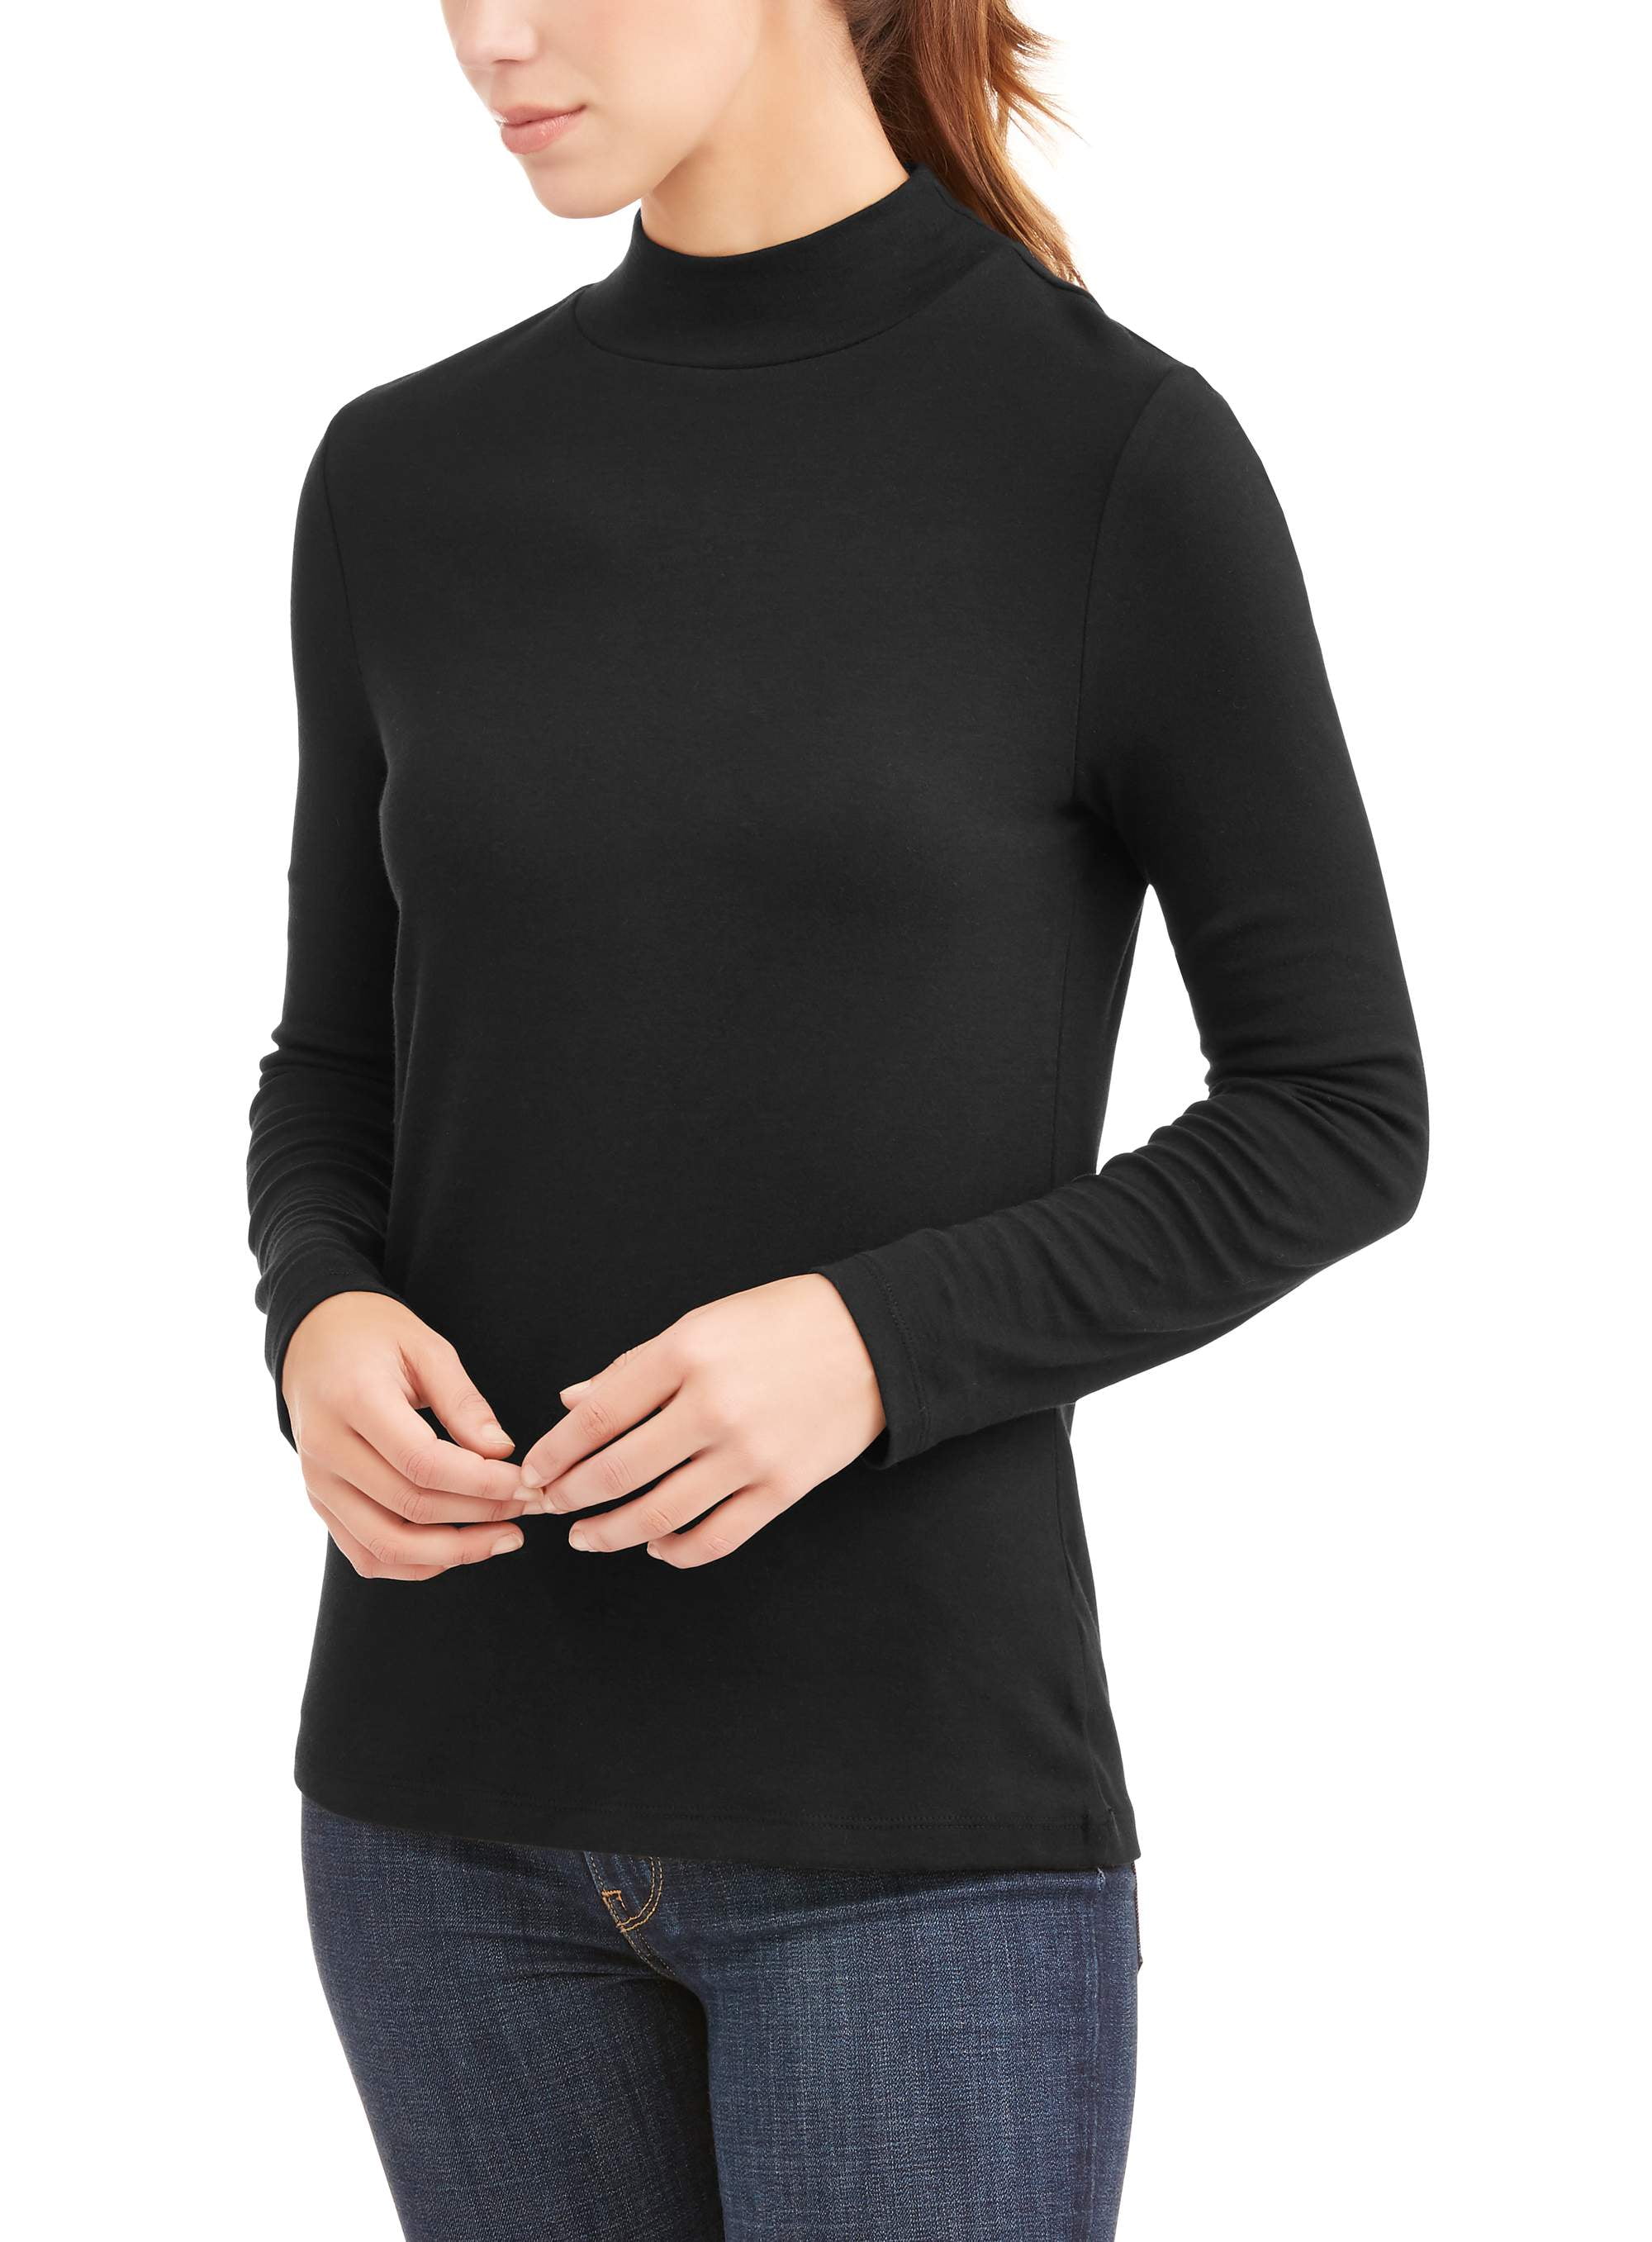 Download White Stag - Women's Long Sleeve Mock Neck T-Shirt ...